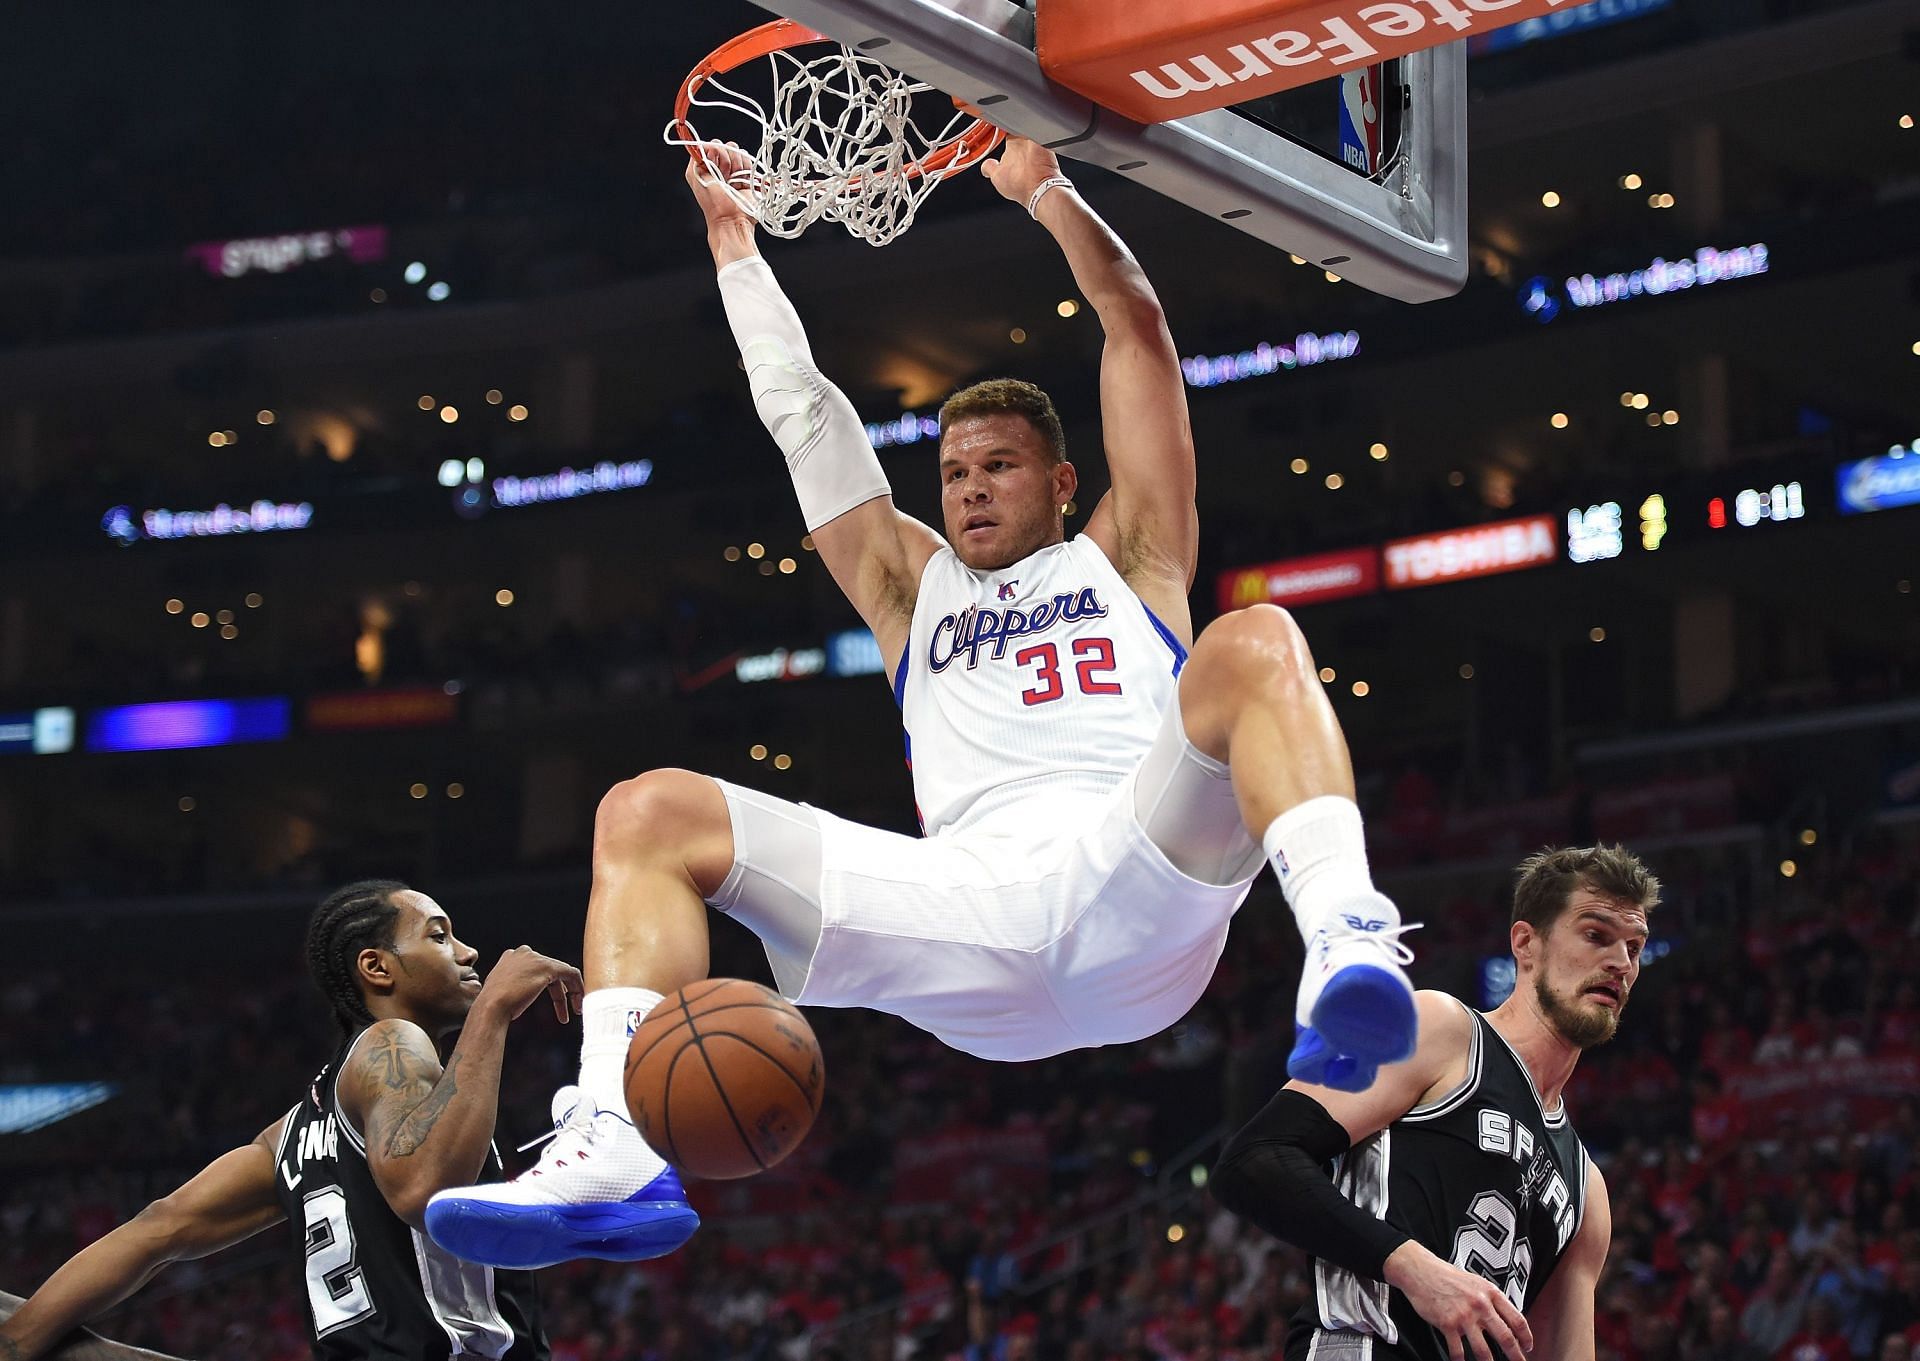 Blake Griffin during his time with the LA Clippers